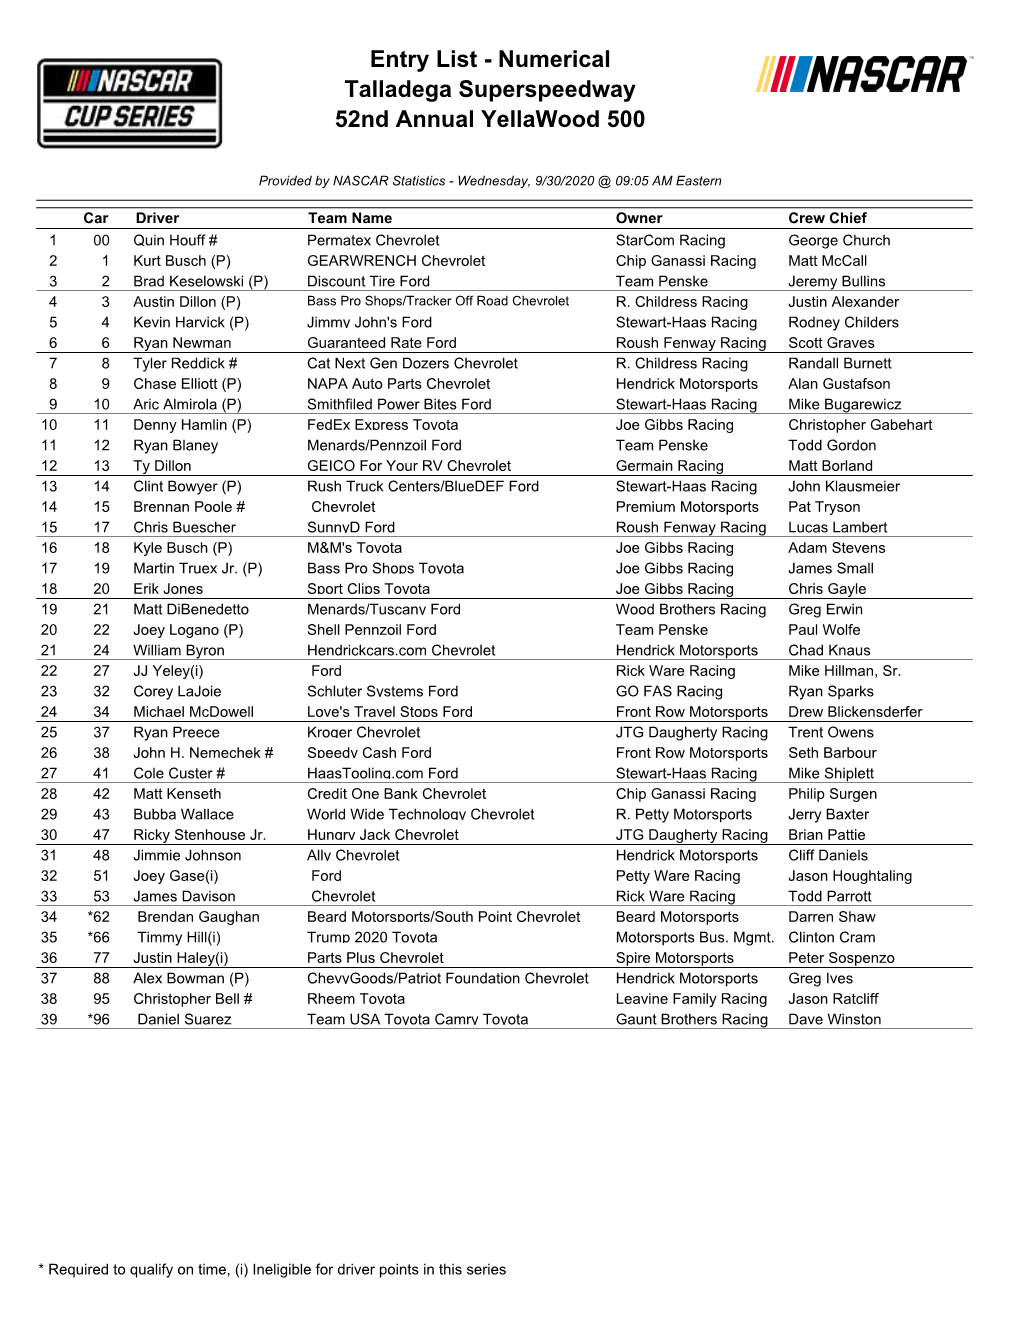 Entry List - Numerical Talladega Superspeedway 52Nd Annual Yellawood 500